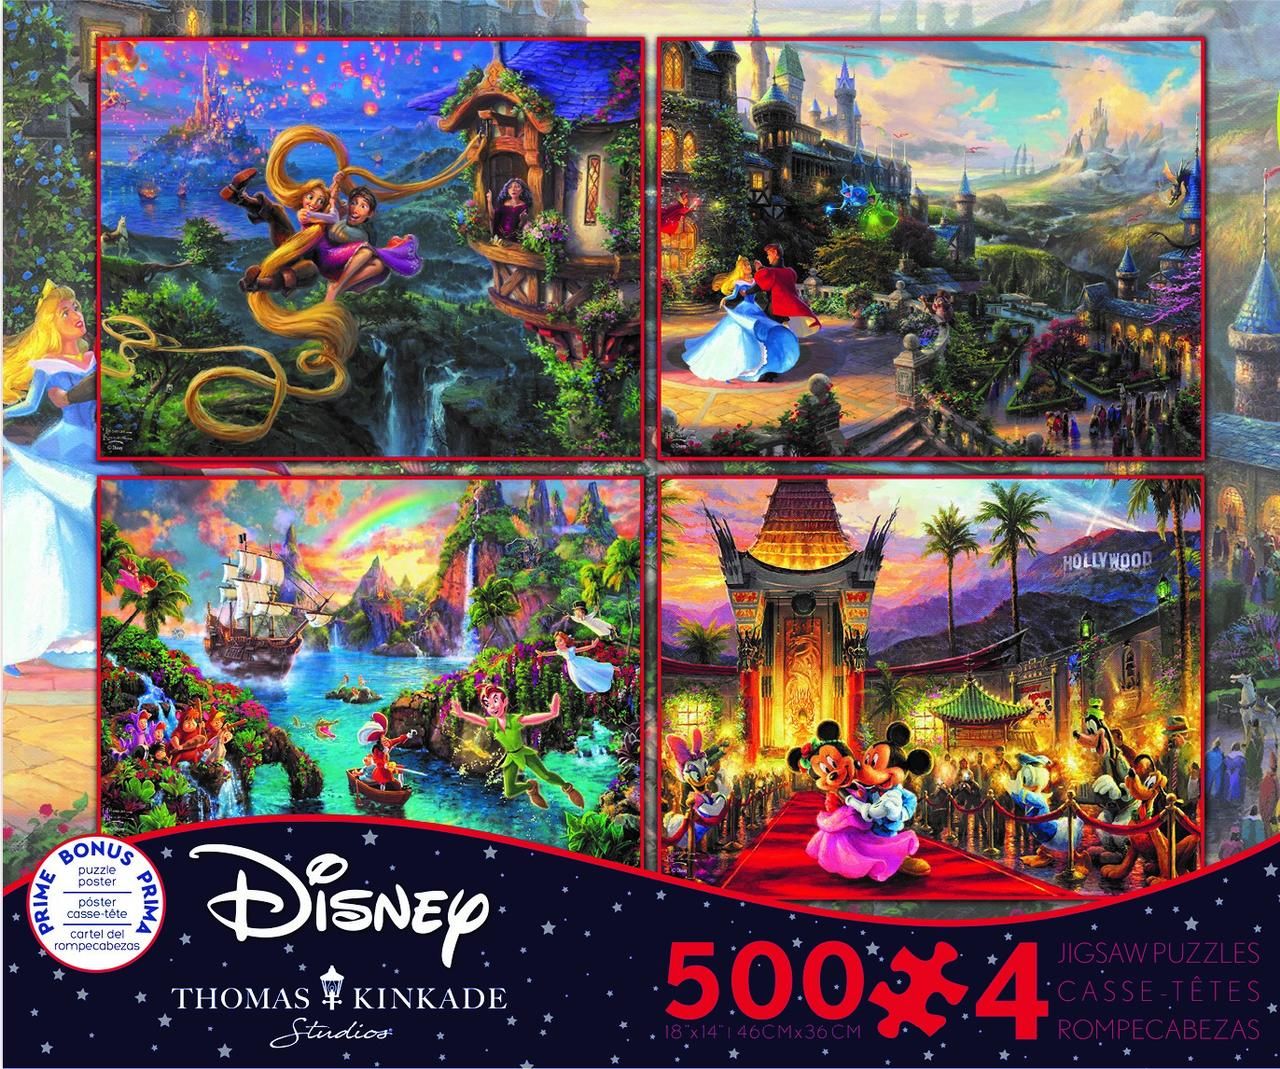 [RDY] [送料無料] Ceaco - 4 In 1 Multipack - Thomas Kinkade - The Disney Collection - 4 In 1 Multipack Jigsaw Puzzle [楽天海外通販] | Ceaco - 4 In 1 Multipack - Thomas Kinkade - The Disney Collection - 4 In 1 Multipack Jigsaw Puzzle